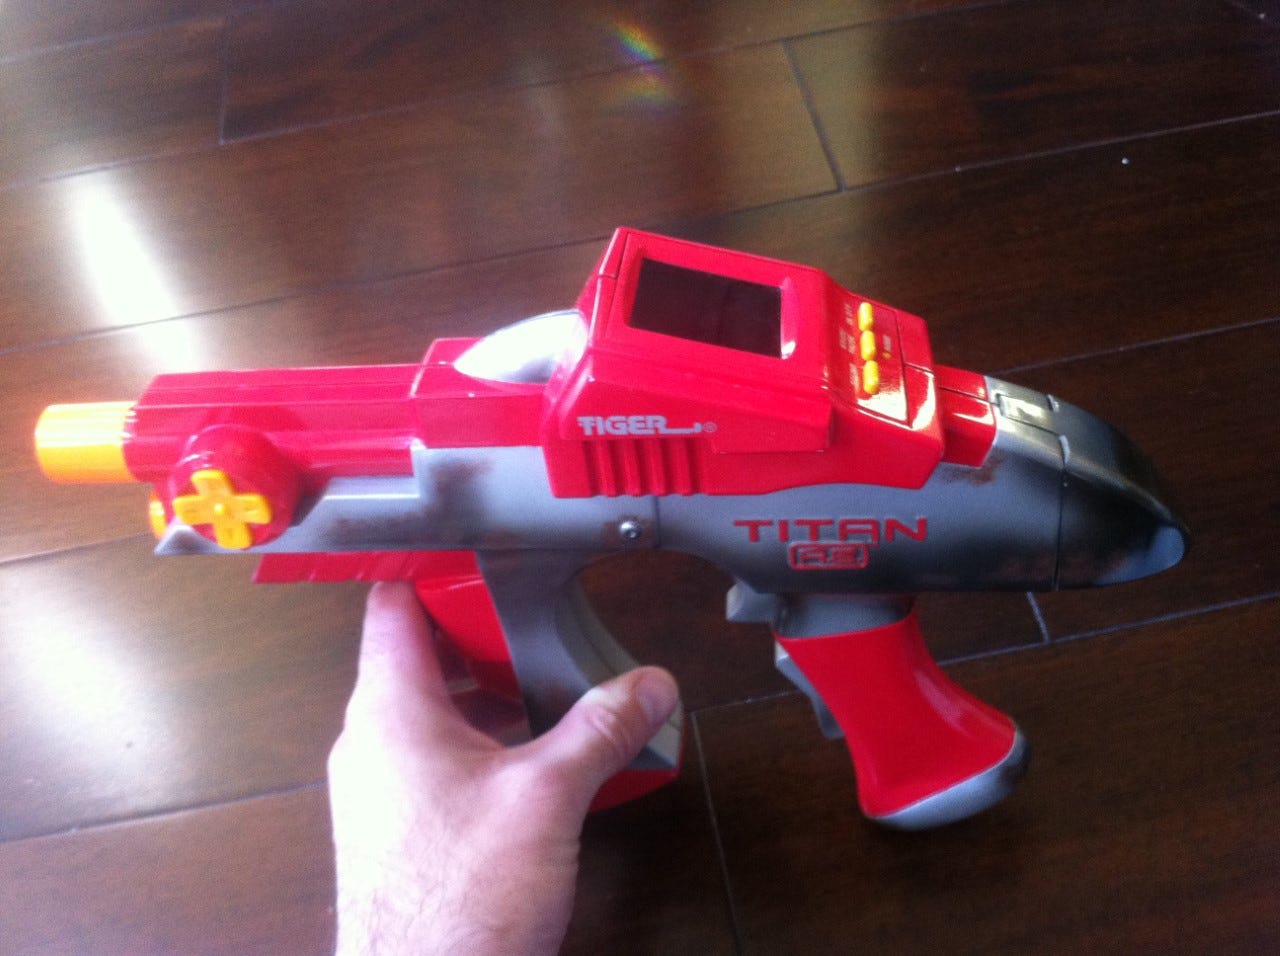 A photograph of a prototype LED based gun game with "Titan" on it. Chris believes this to be the only one in the world.